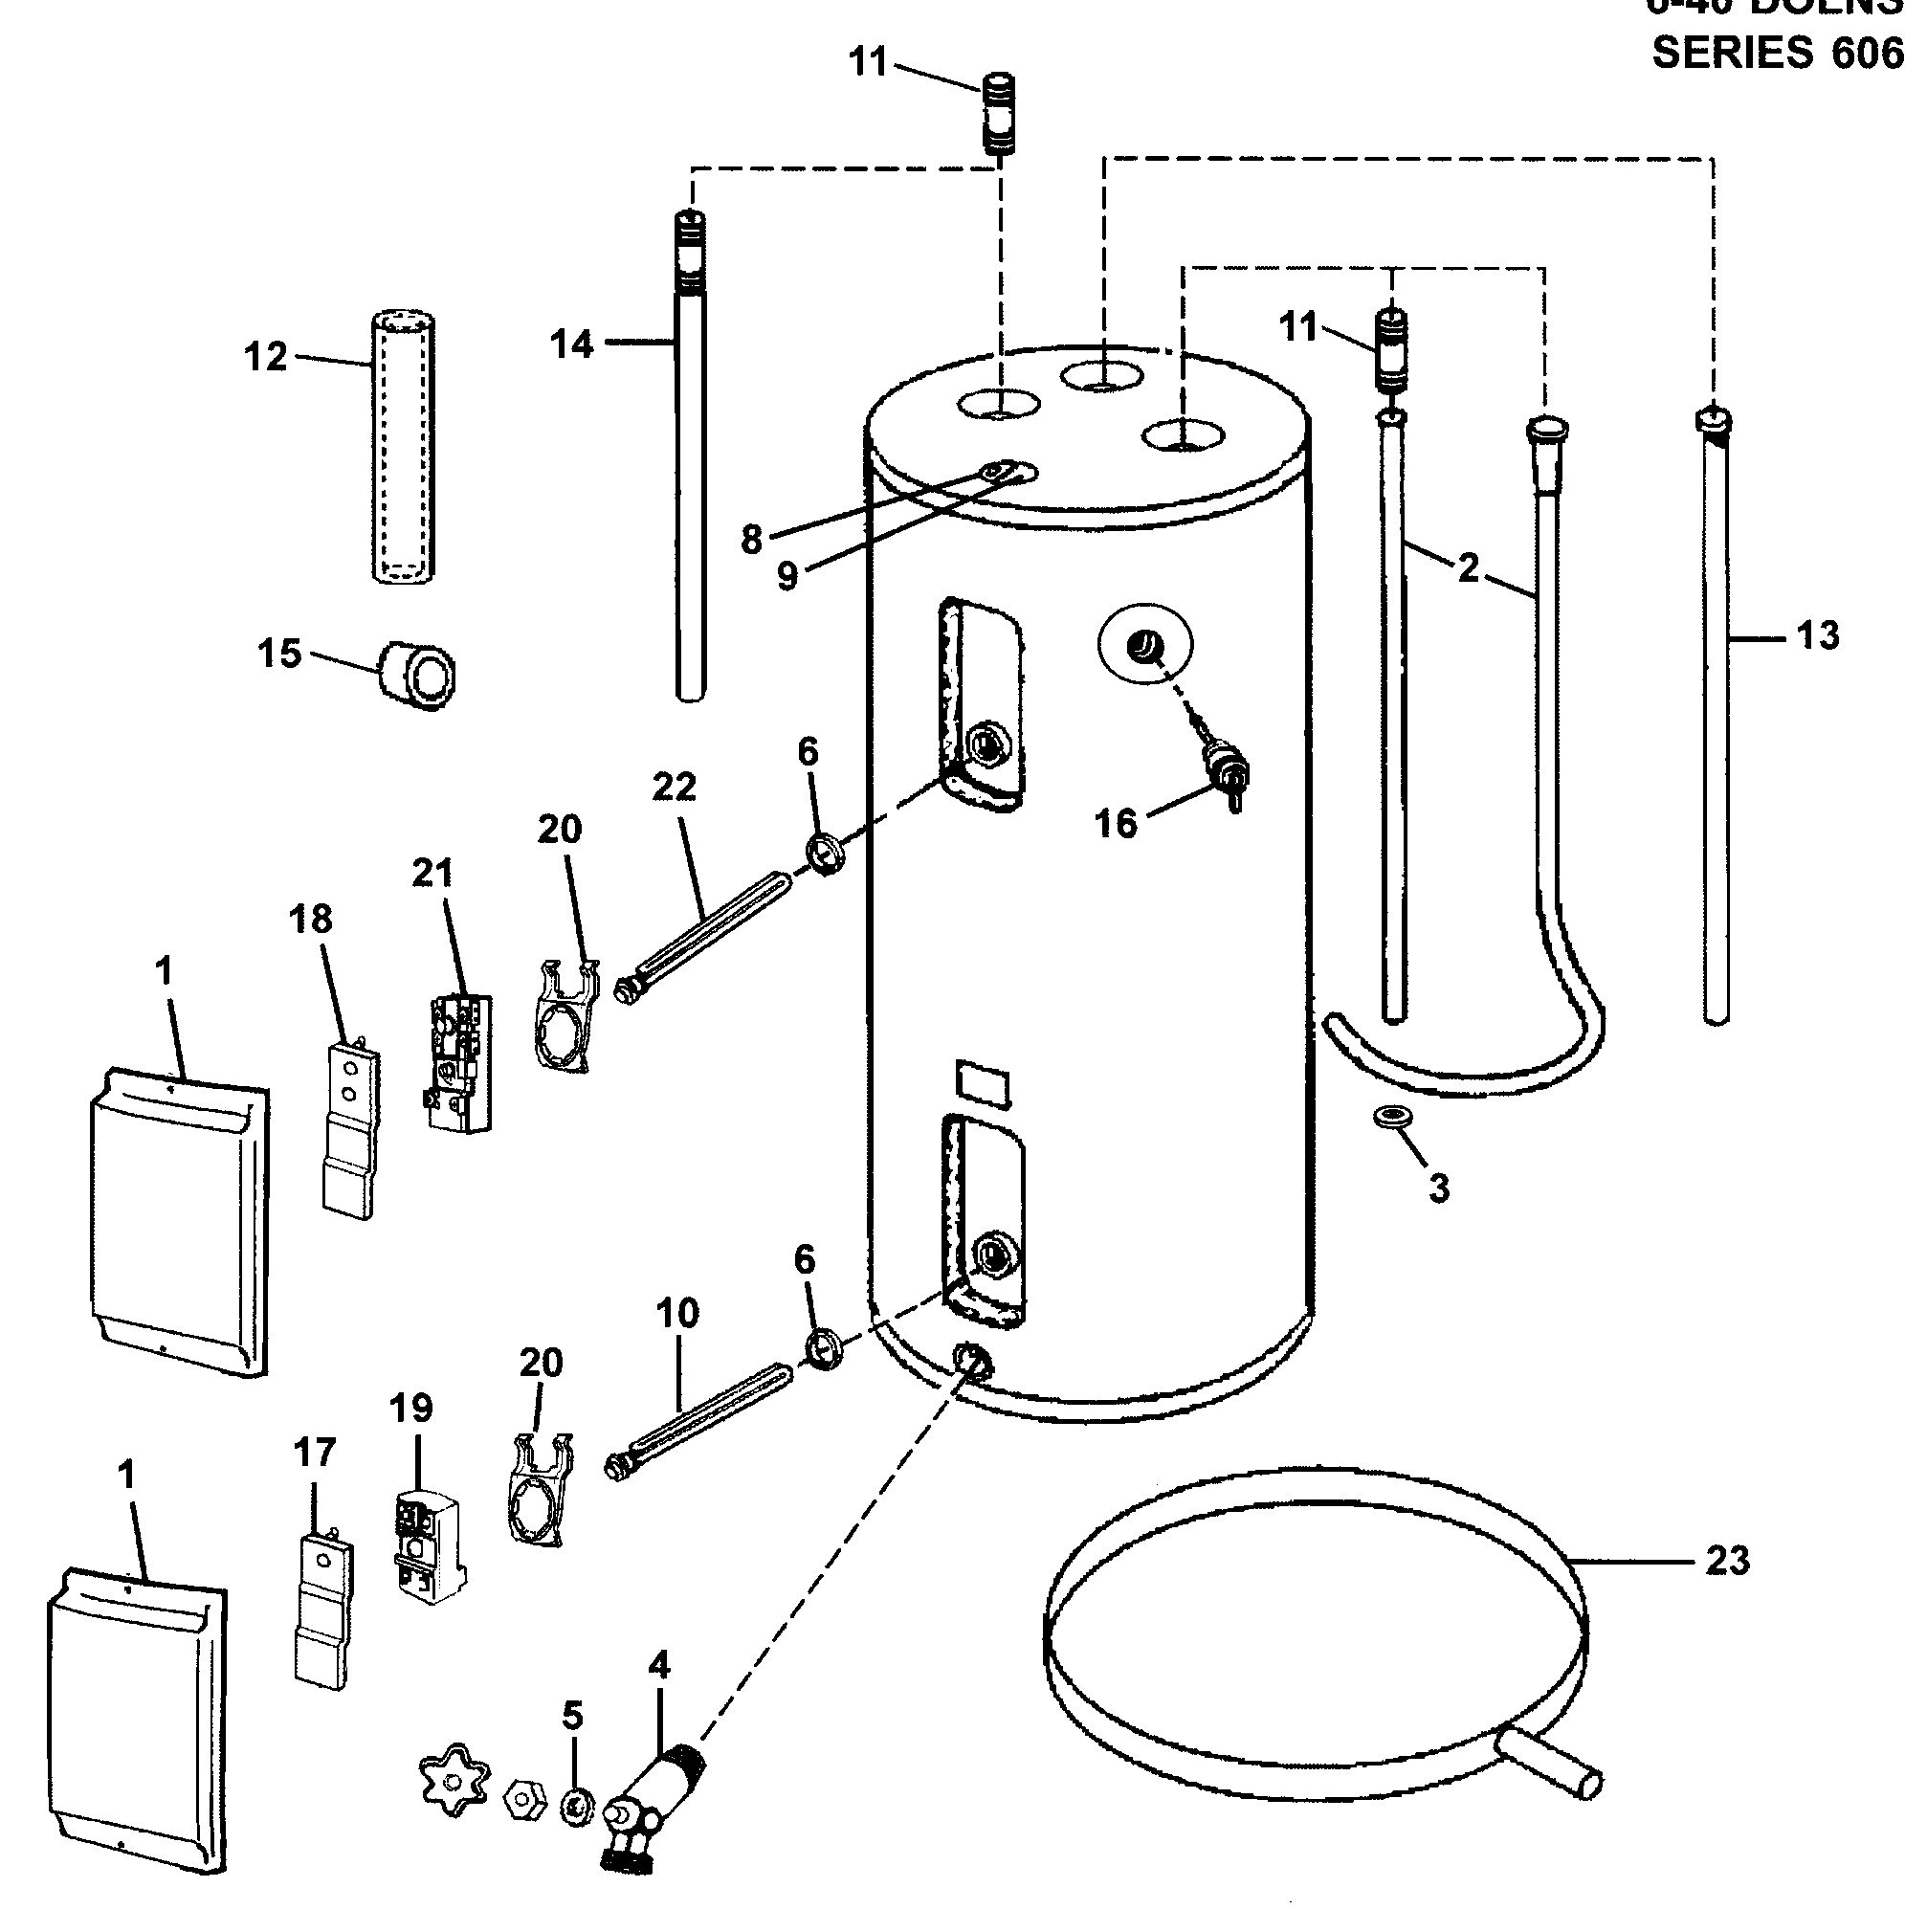 Wiring Diagram Electric Water Heater New Electric Water Heater Parts Diagram